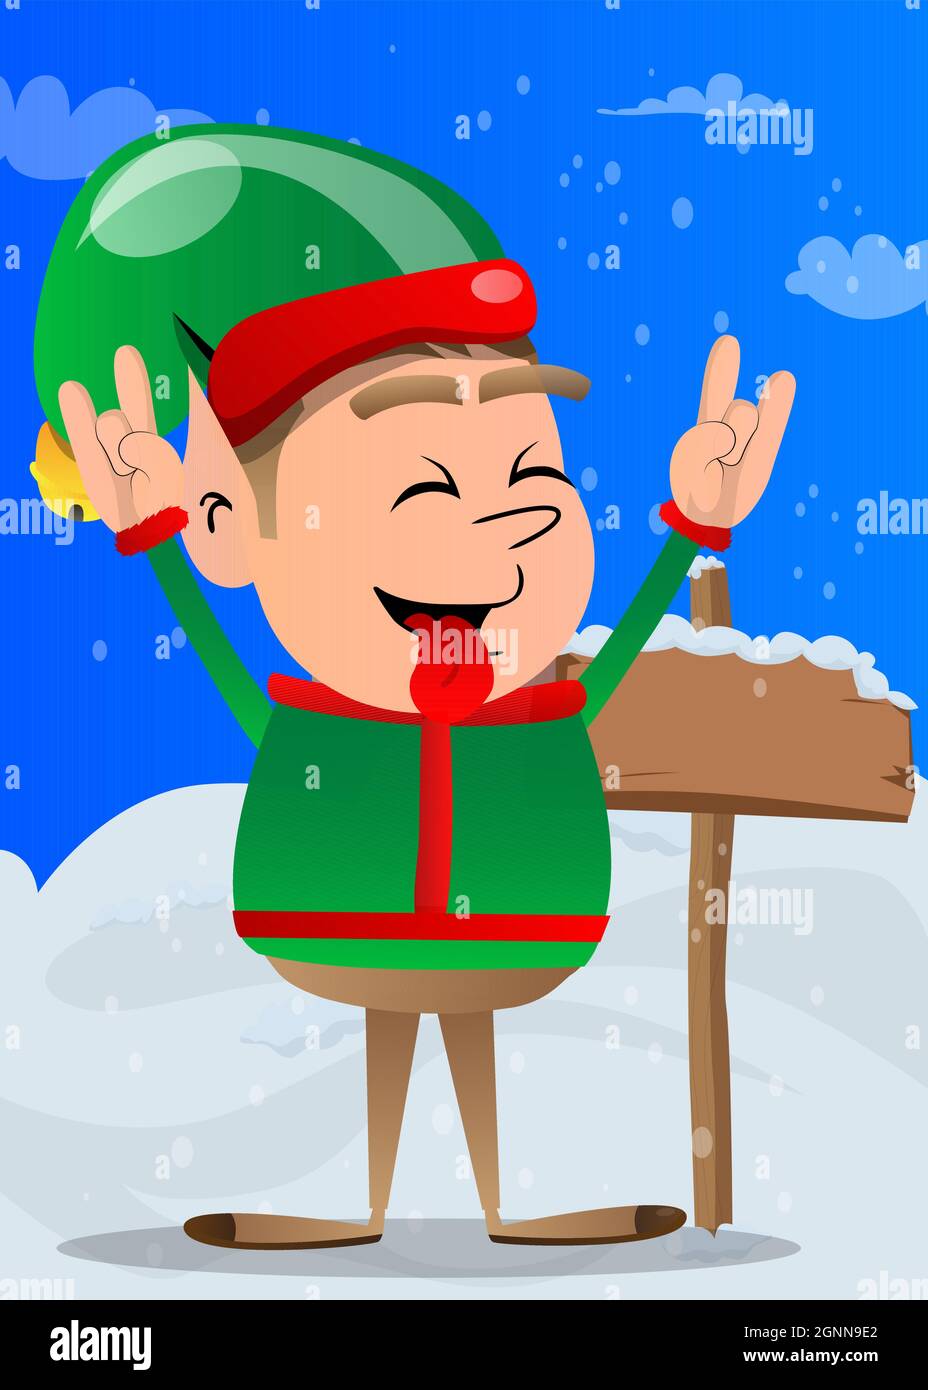 Christmas Elf With Hands In Rocker Pose Vector Cartoon Character Illustration Of Santa Clauss 9847